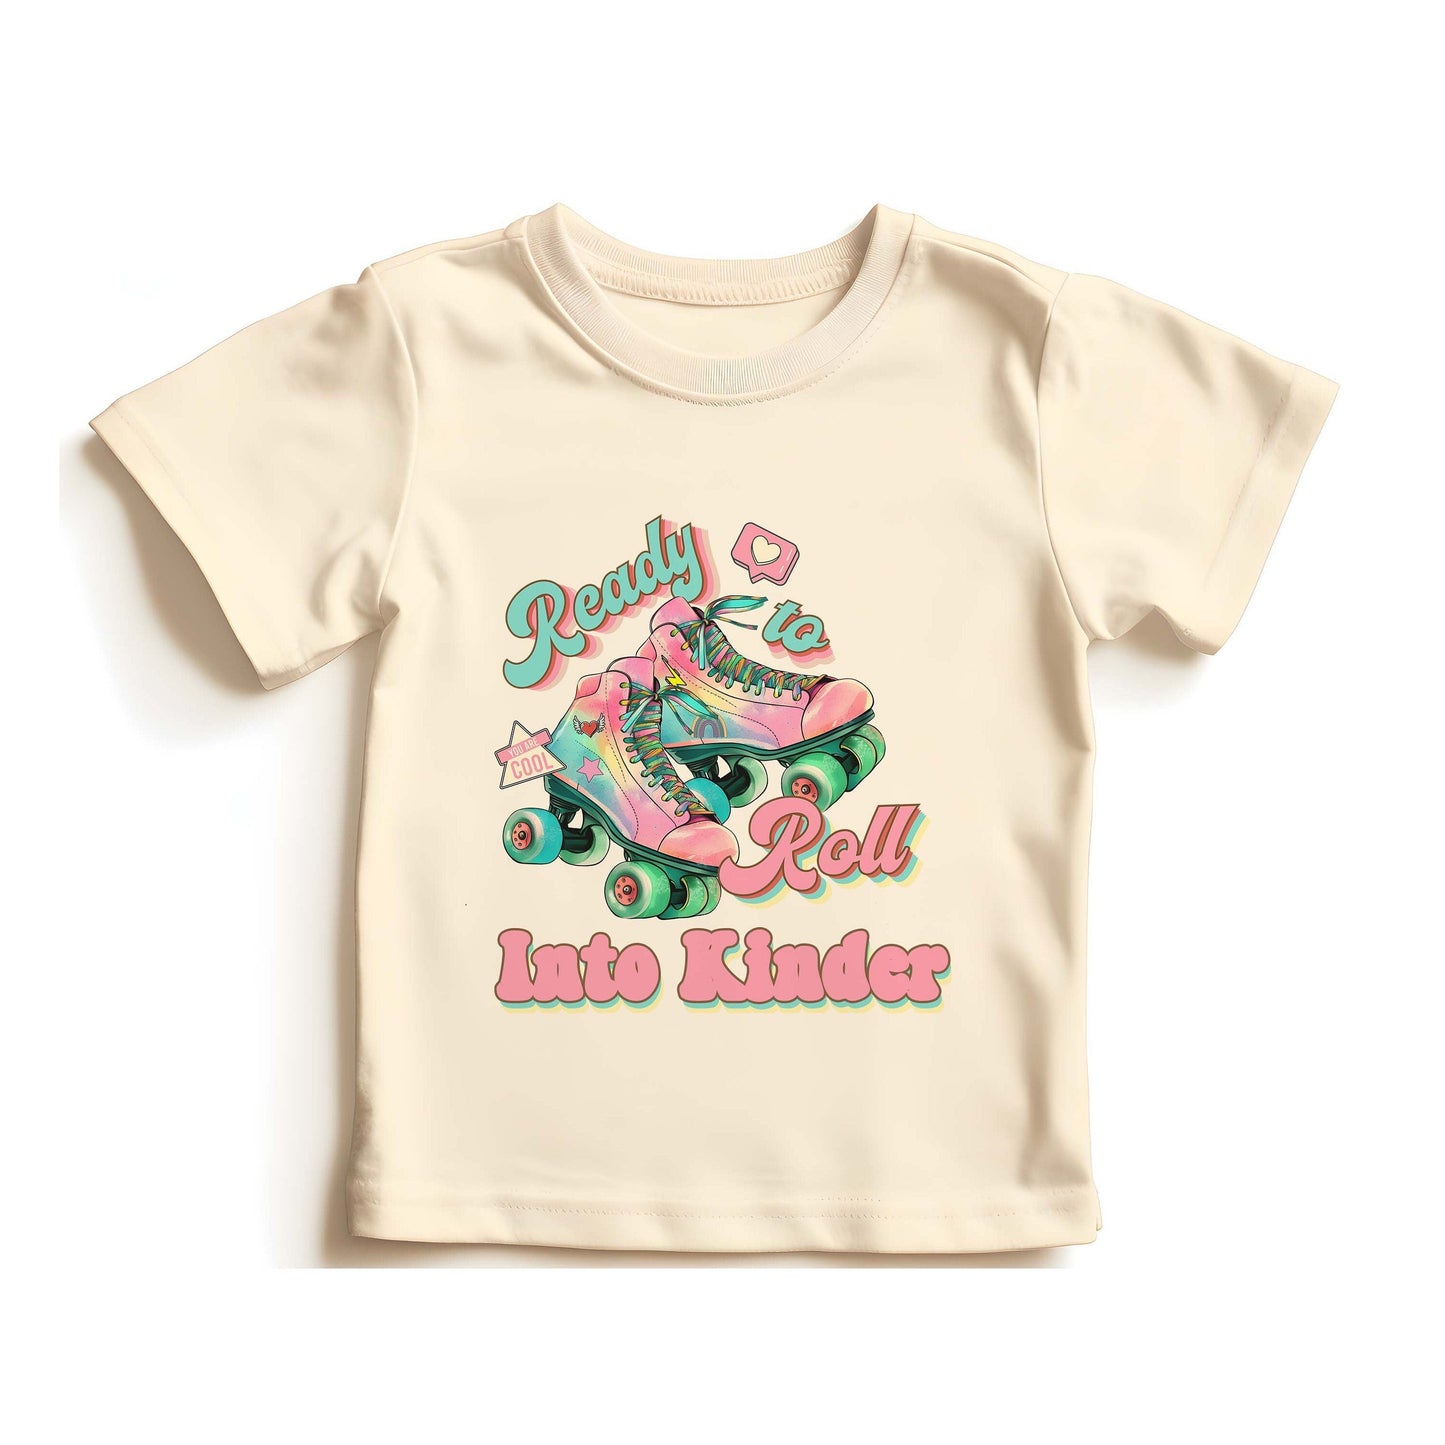 Ready to roll into Kinder shirt | Back to School Shirt | First Day Of School shirt | Kindergarten shirt